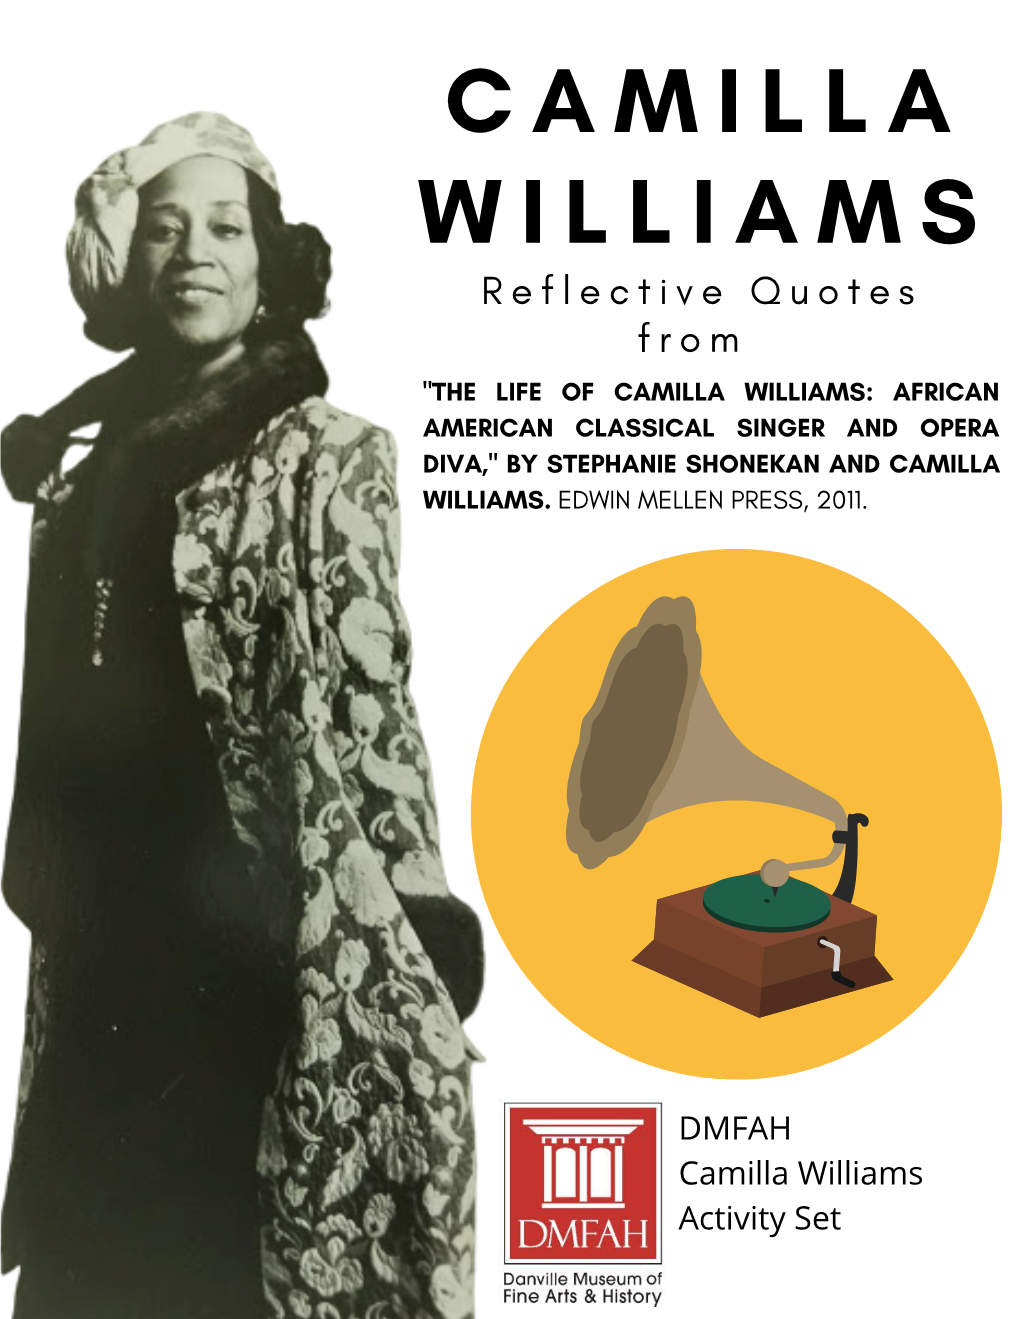 Camilla Williams: African American Classical Singer and Opera Diva," by Stephanie Shonekan and Camilla Williams